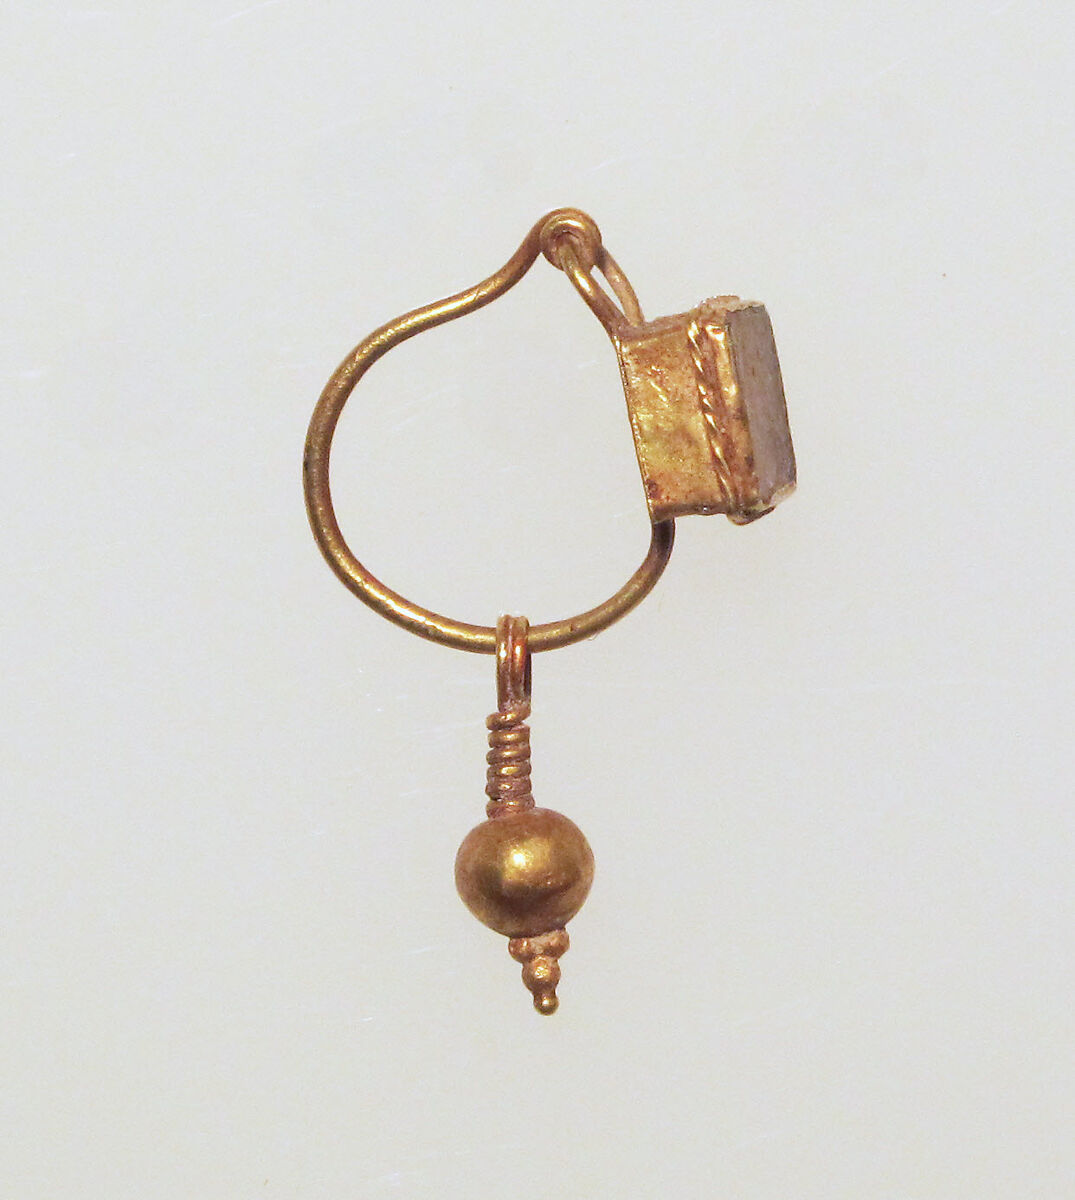 Earring with pendant, Gold, Roman 